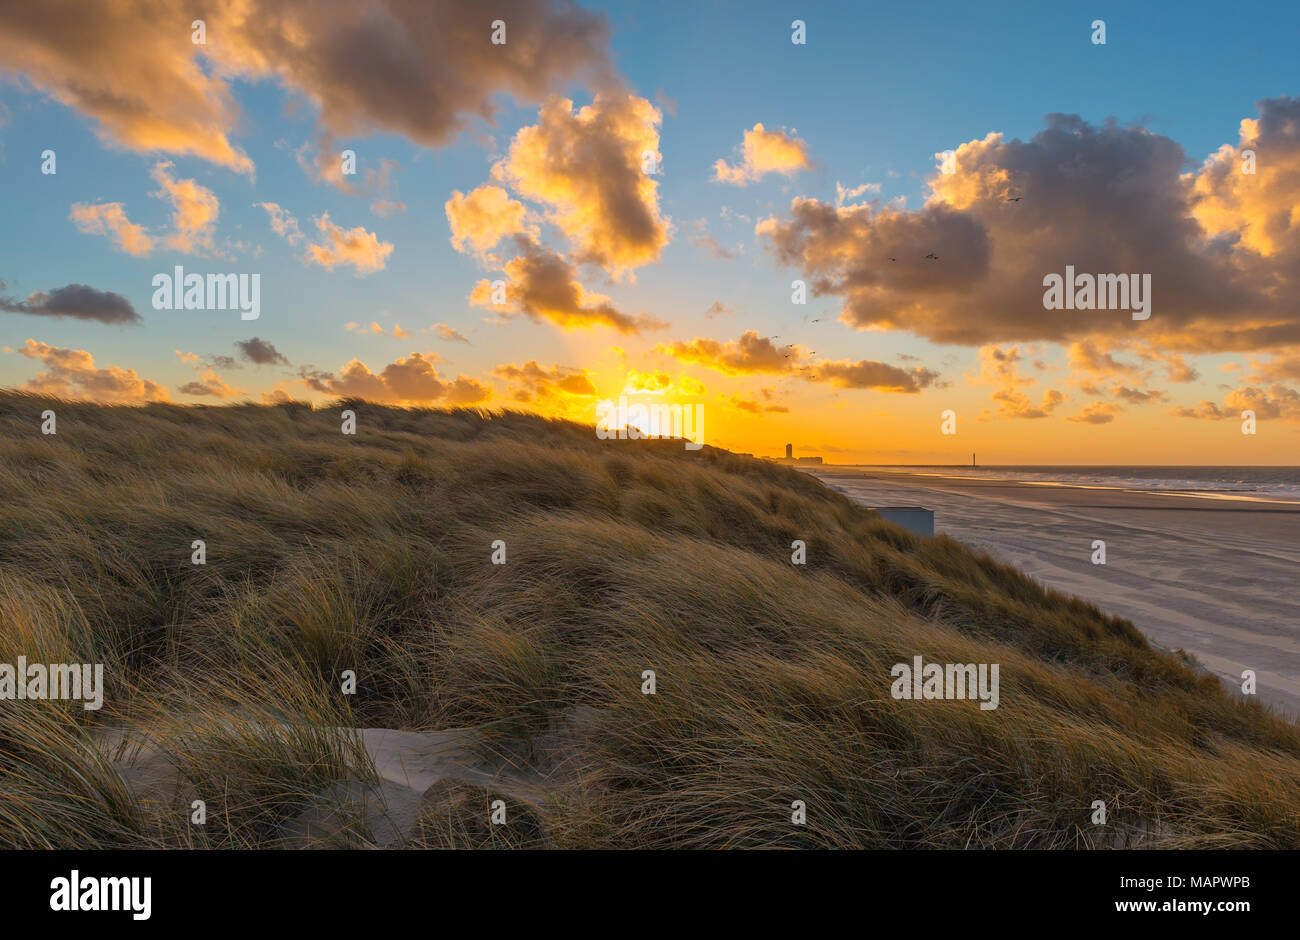 Sunset in the sand dunes of Ostend city with a view over the North Sea and beach with the silhouette of the lighthouse in the background, Belgium. Stock Photo